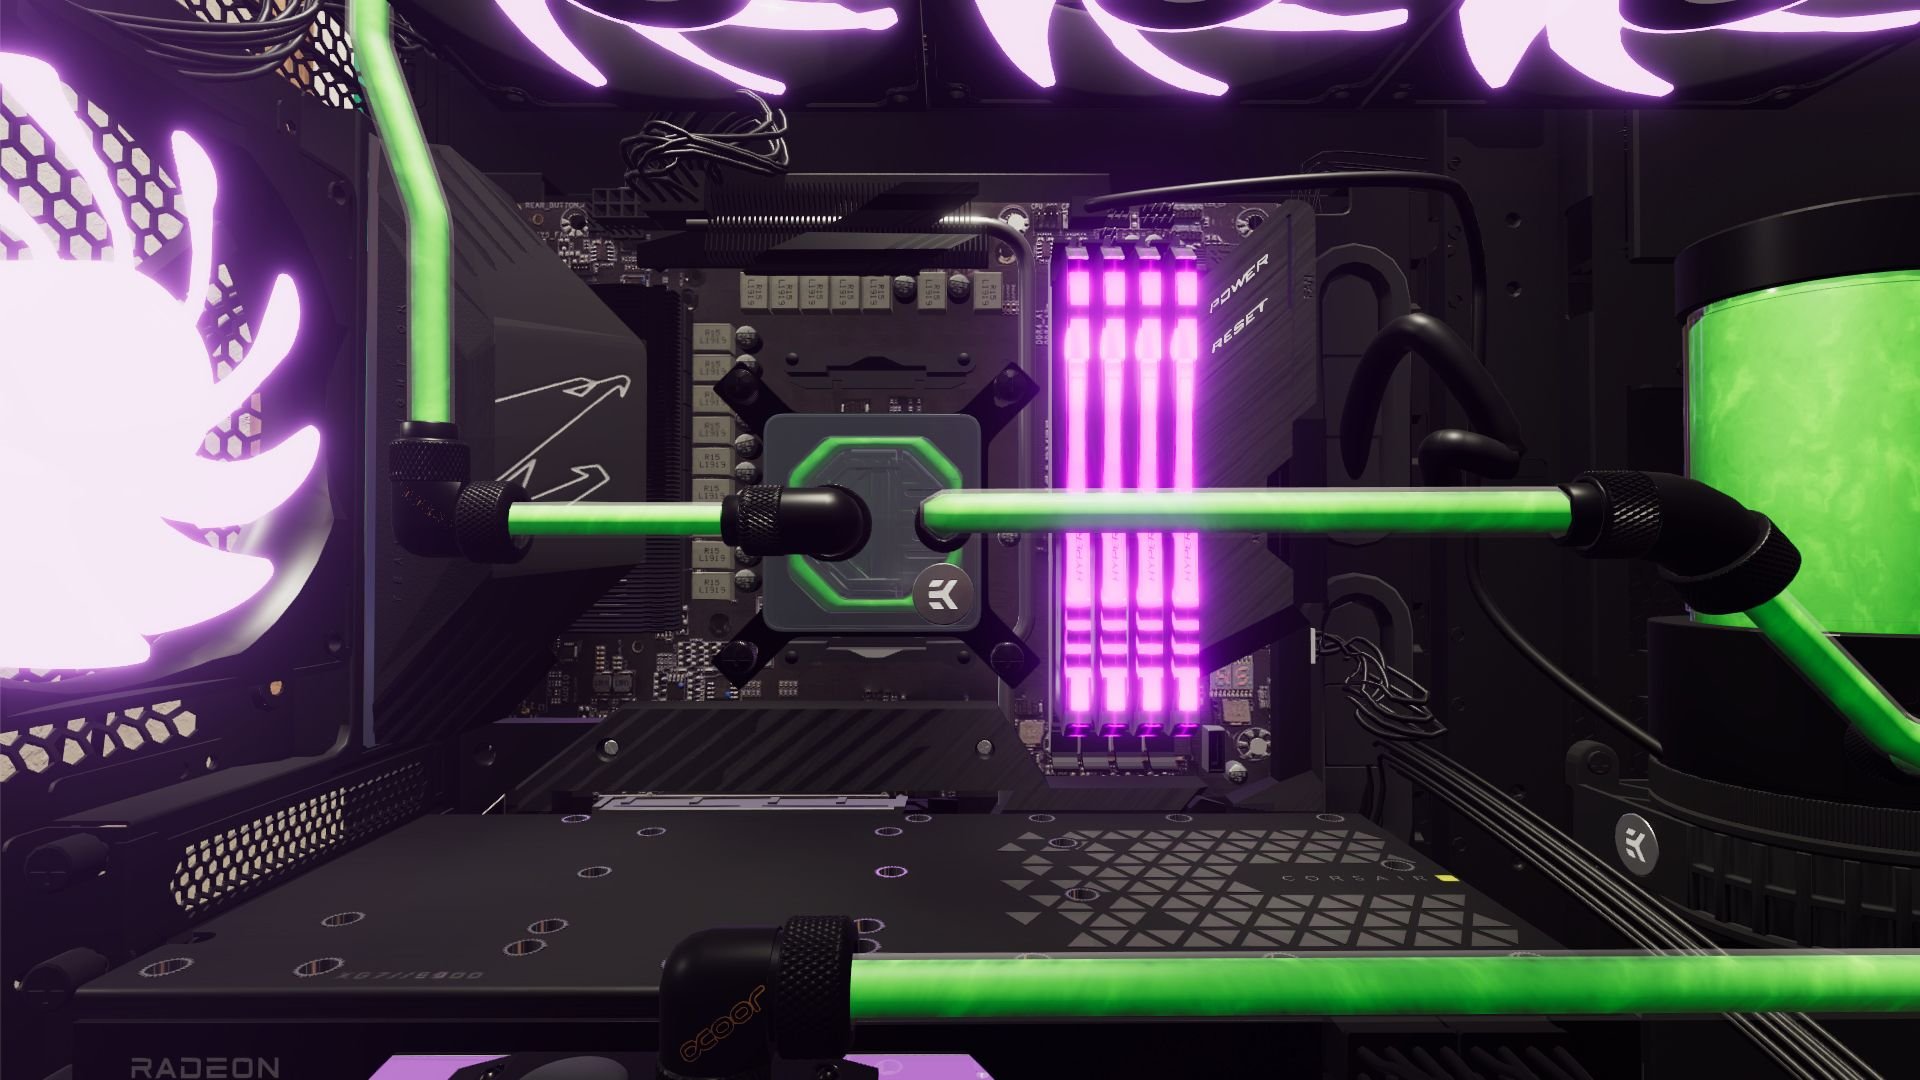 PC BUILDING SIMULATOR 2 is Releasing Later This Year Exclusively on Epic Games Store